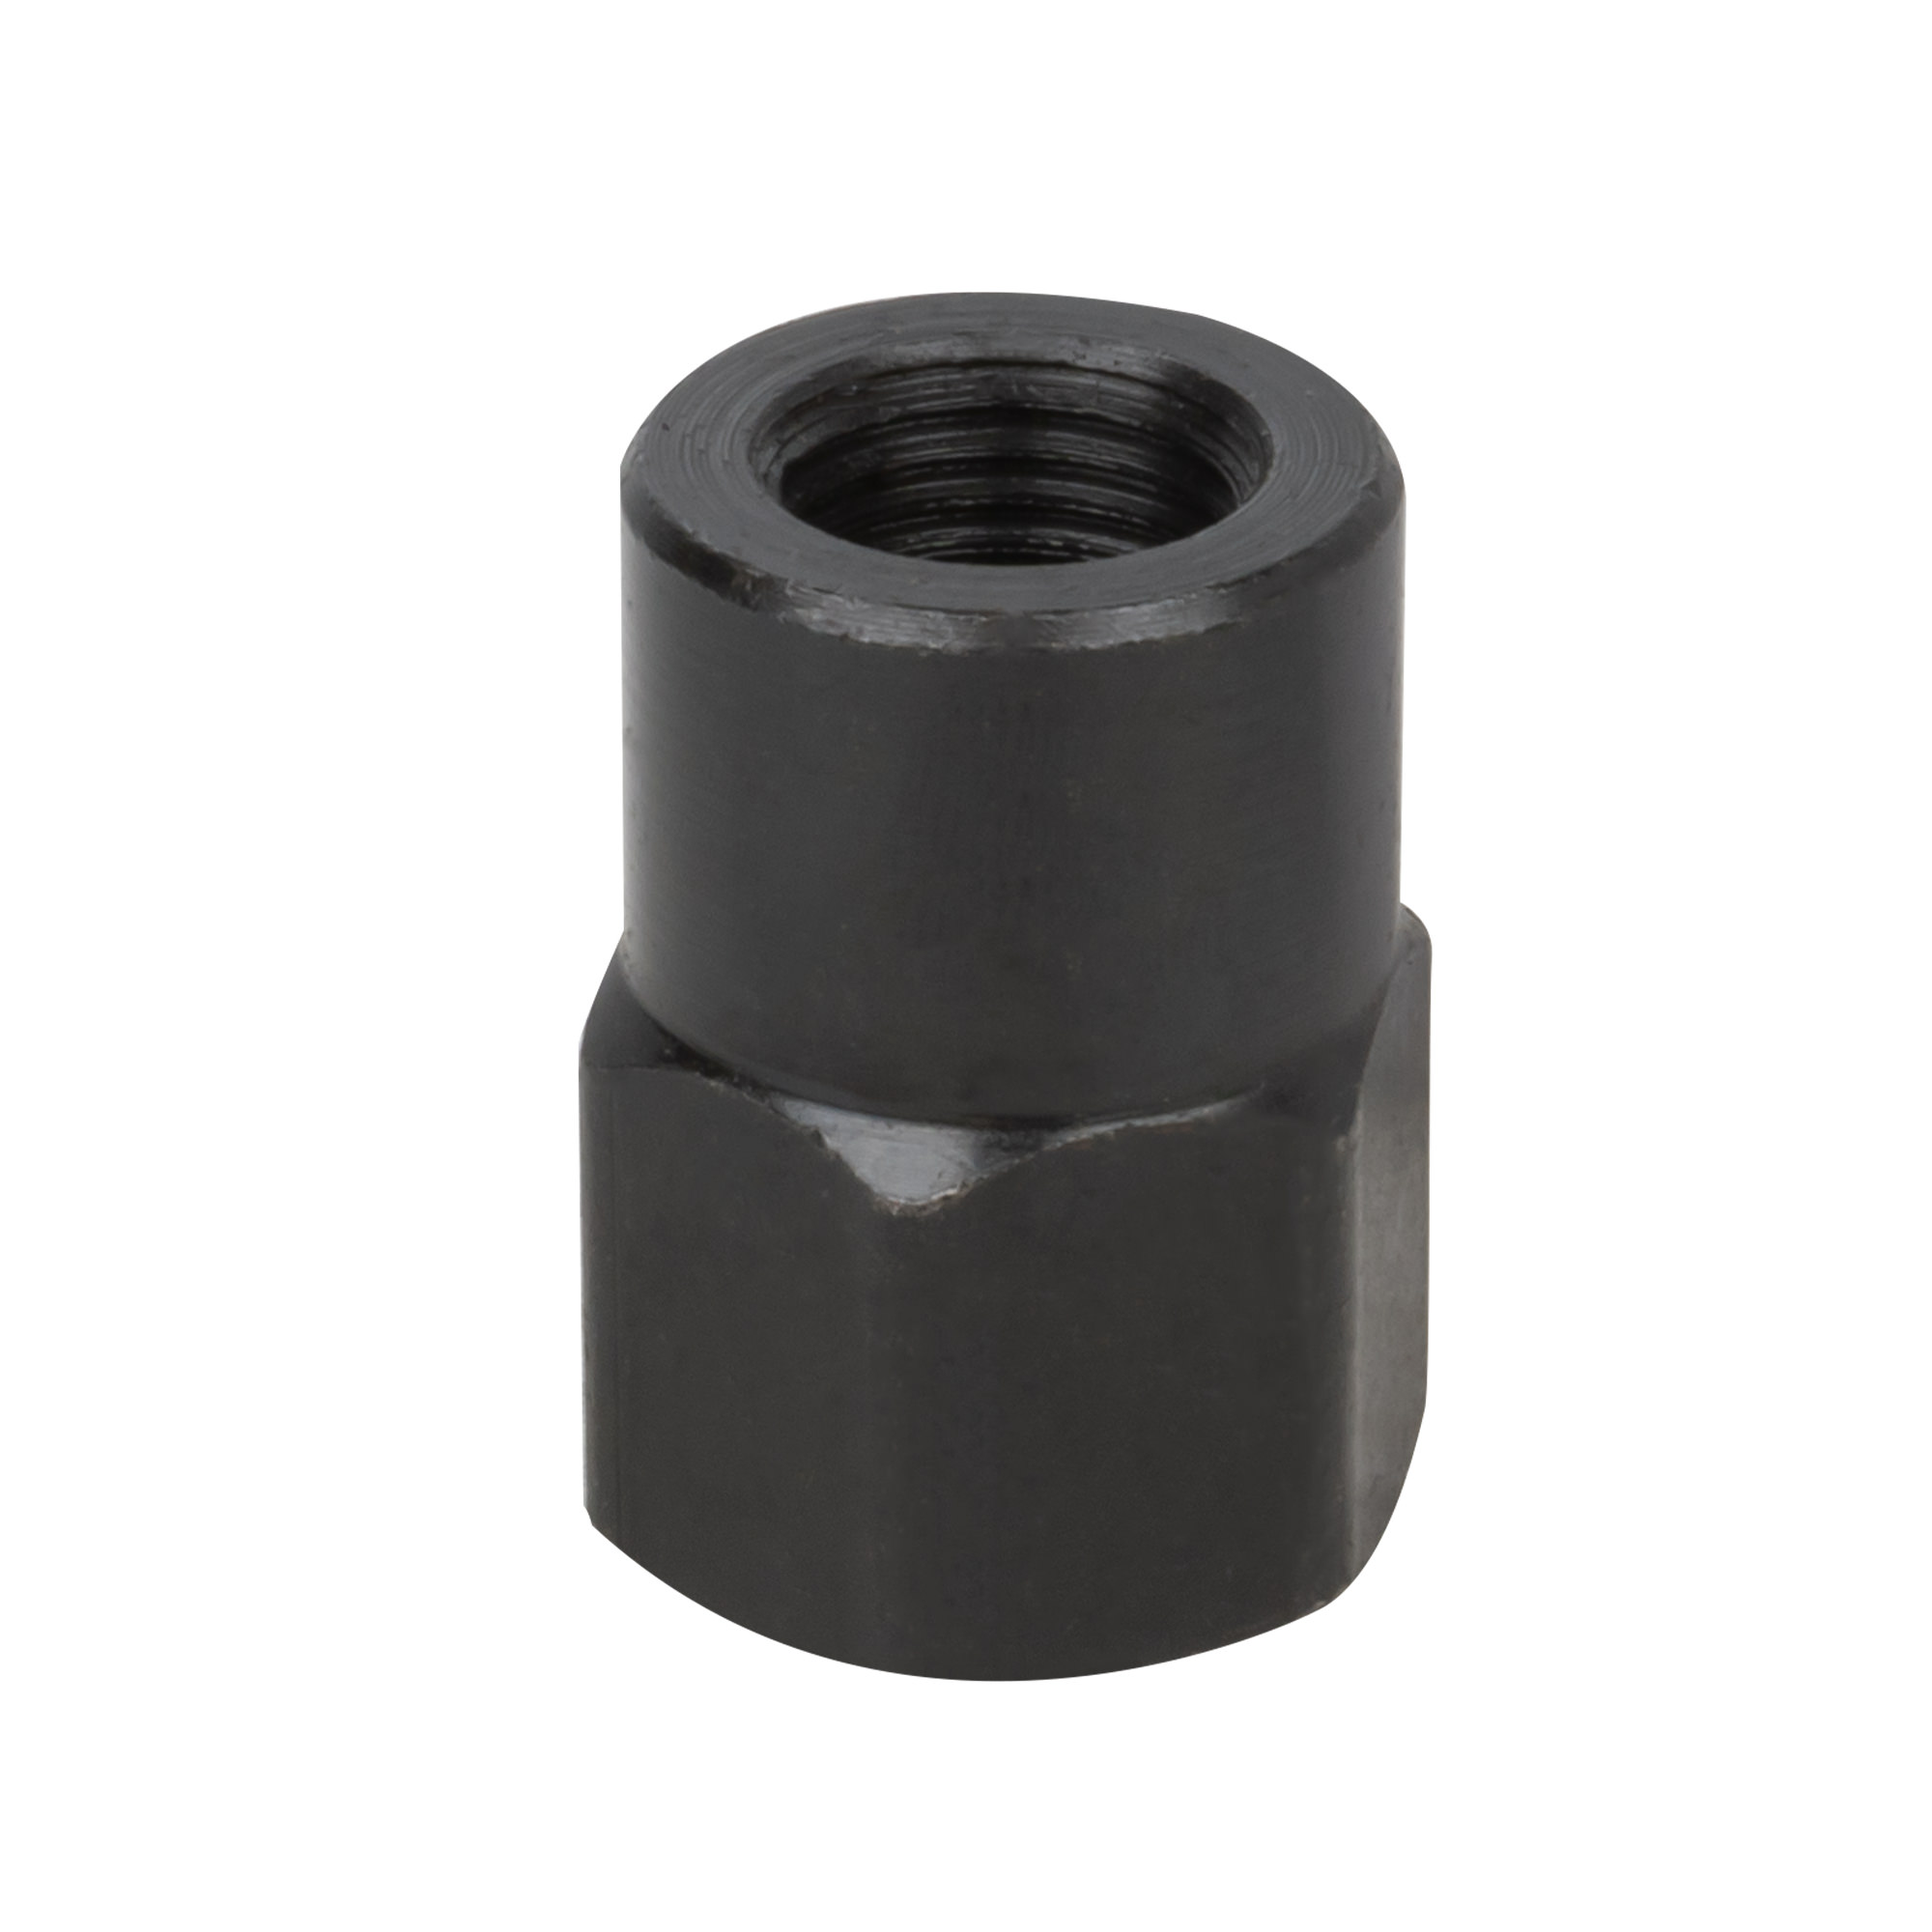 ADAPTER M14X1,5 33MM FOR INJECTOR PULLER 54186